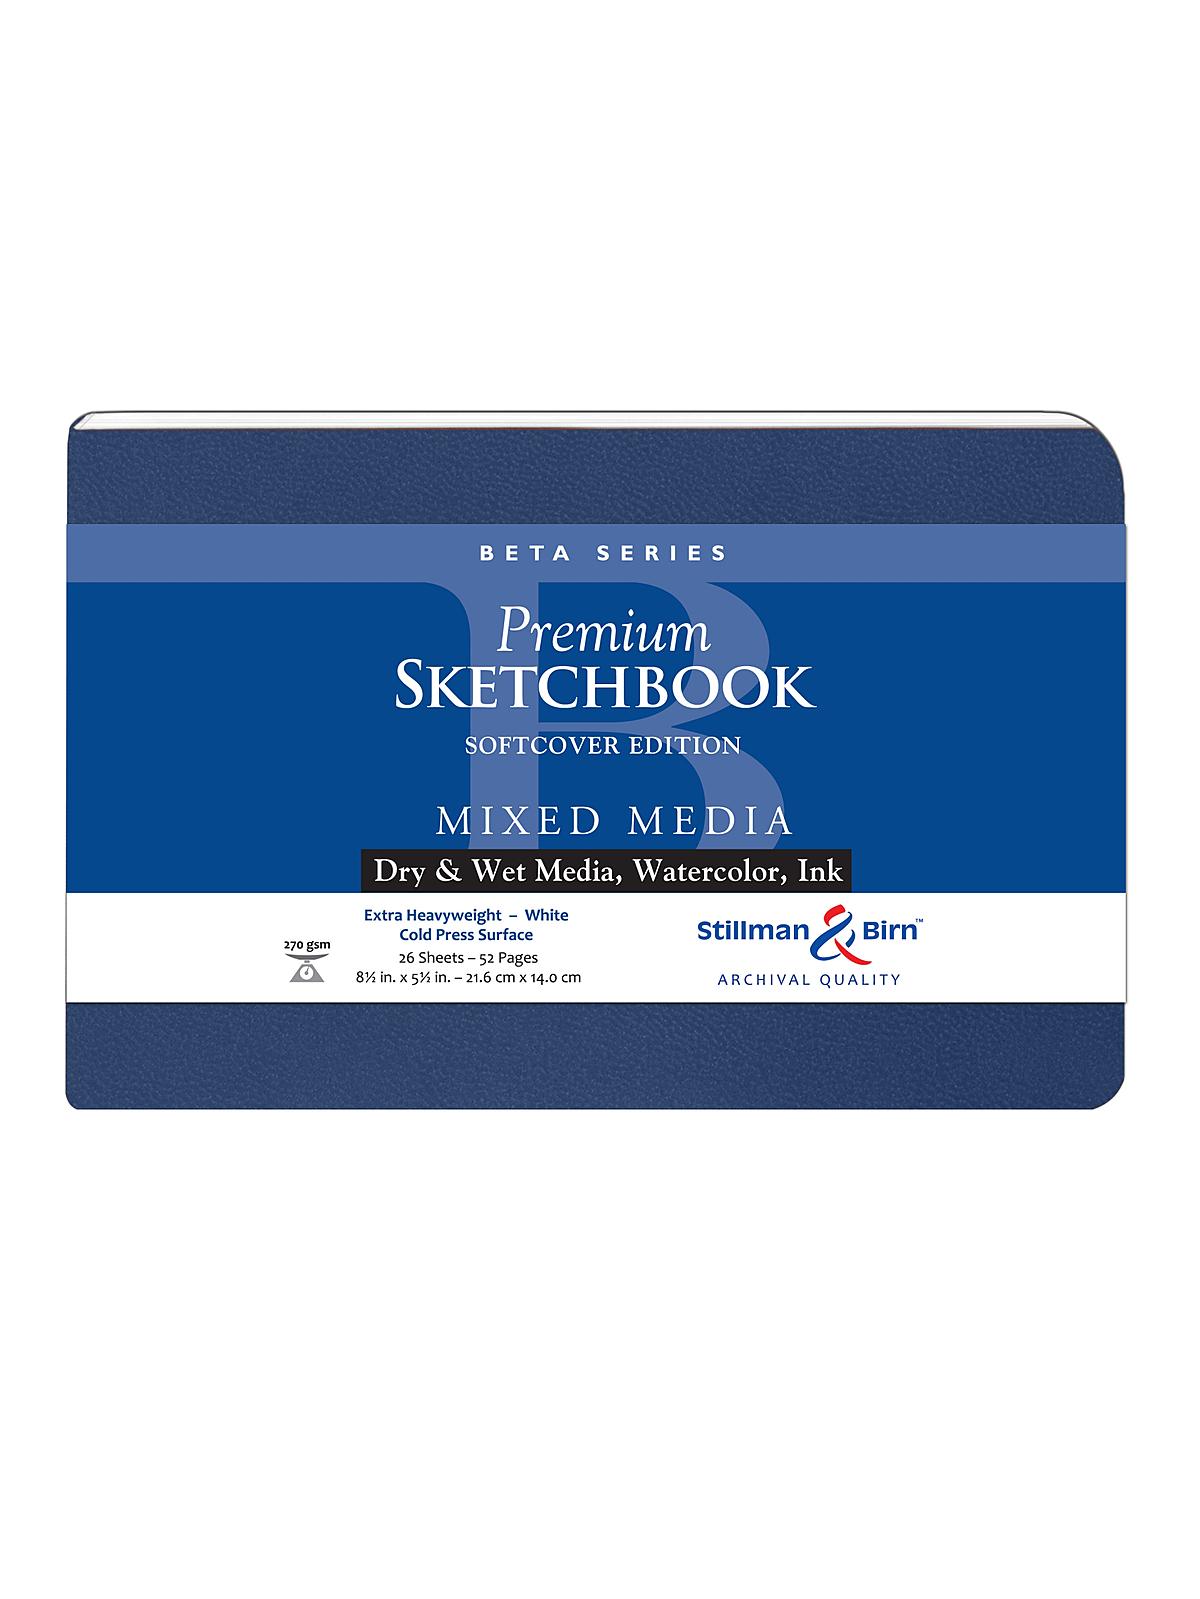 Beta Series Softcover Sketchbook 8.5 In. X 5.5 In. Landscape 56 Pages